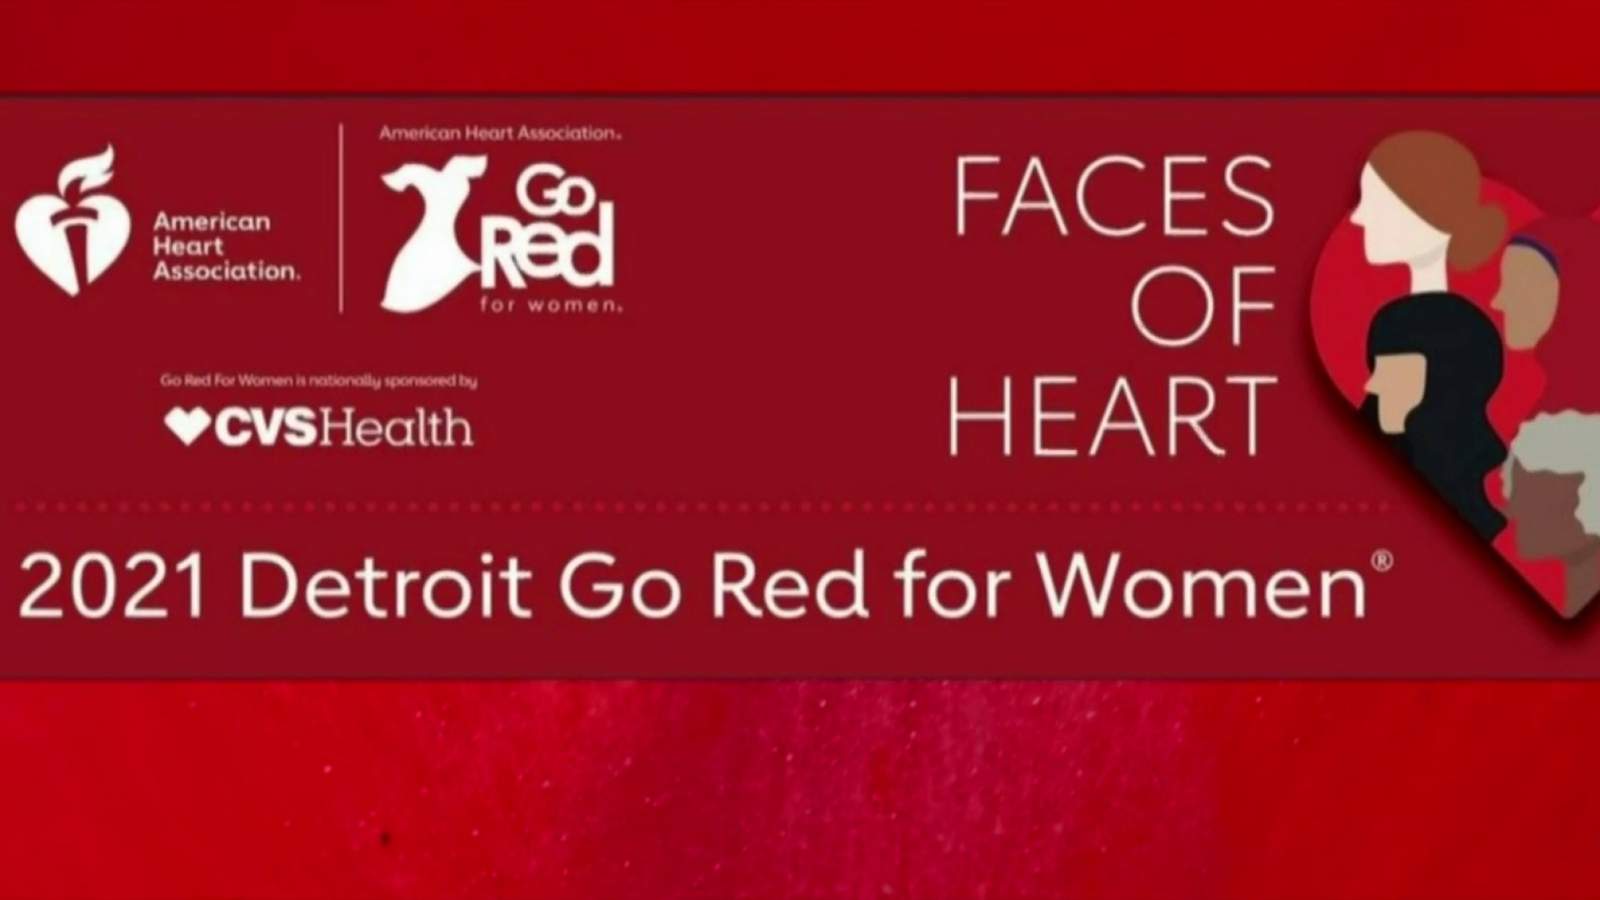 17th annual Detroit Go Red for Women Luncheon goes digital amid pandemic